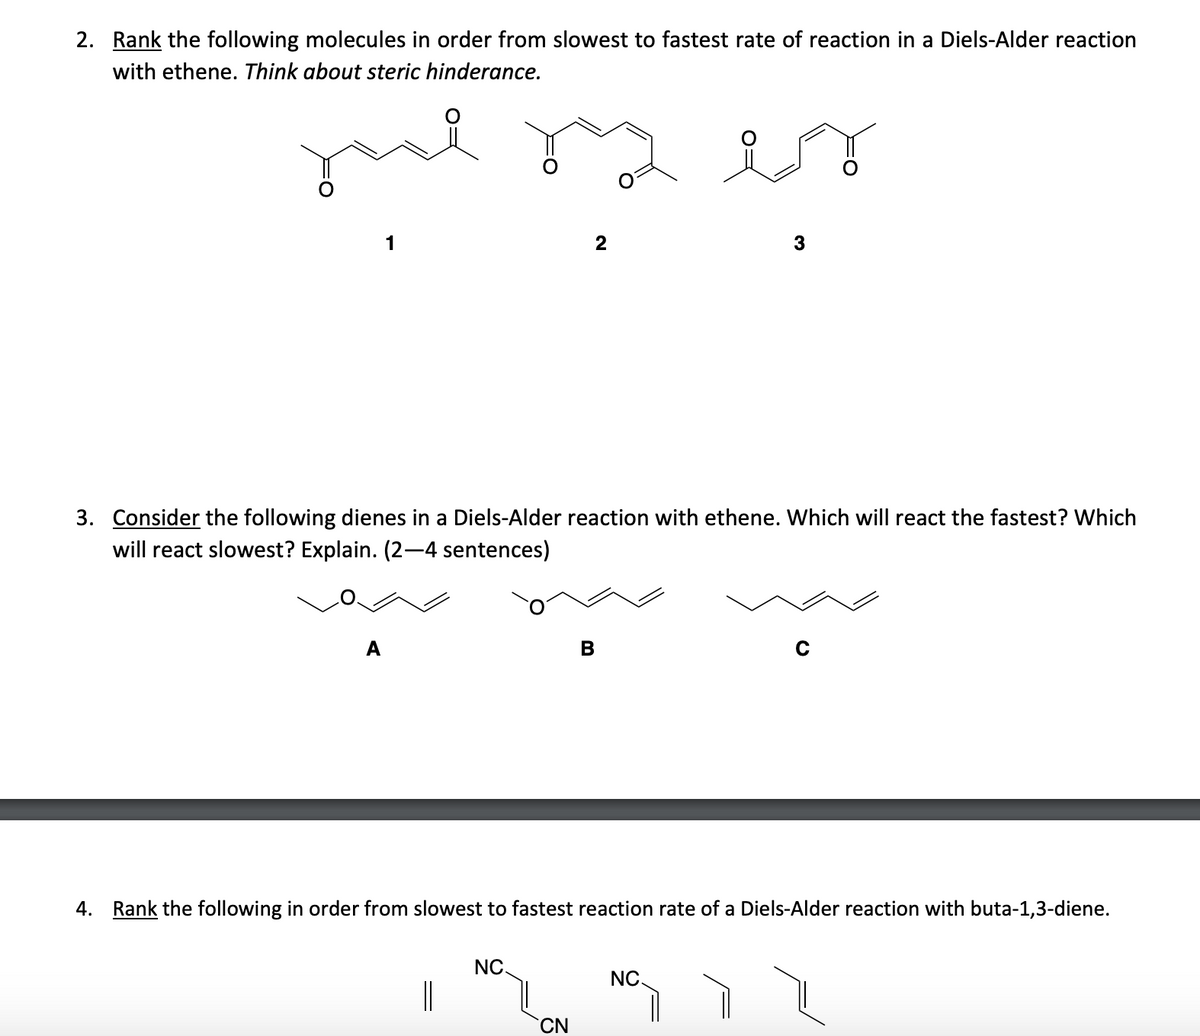 2. Rank the following molecules in order from slowest to fastest rate of reaction in a Diels-Alder reaction
with ethene. Think about steric hinderance.
je
1
A
3. Consider the following dienes in a Diels-Alder reaction with ethene. Which will react the fastest? Which
will react slowest? Explain. (2-4 sentences)
2
NC.
CN
B
3
4. Rank the following in order from slowest to fastest reaction rate of a Diels-Alder reaction with buta-1,3-diene.
NC.
с